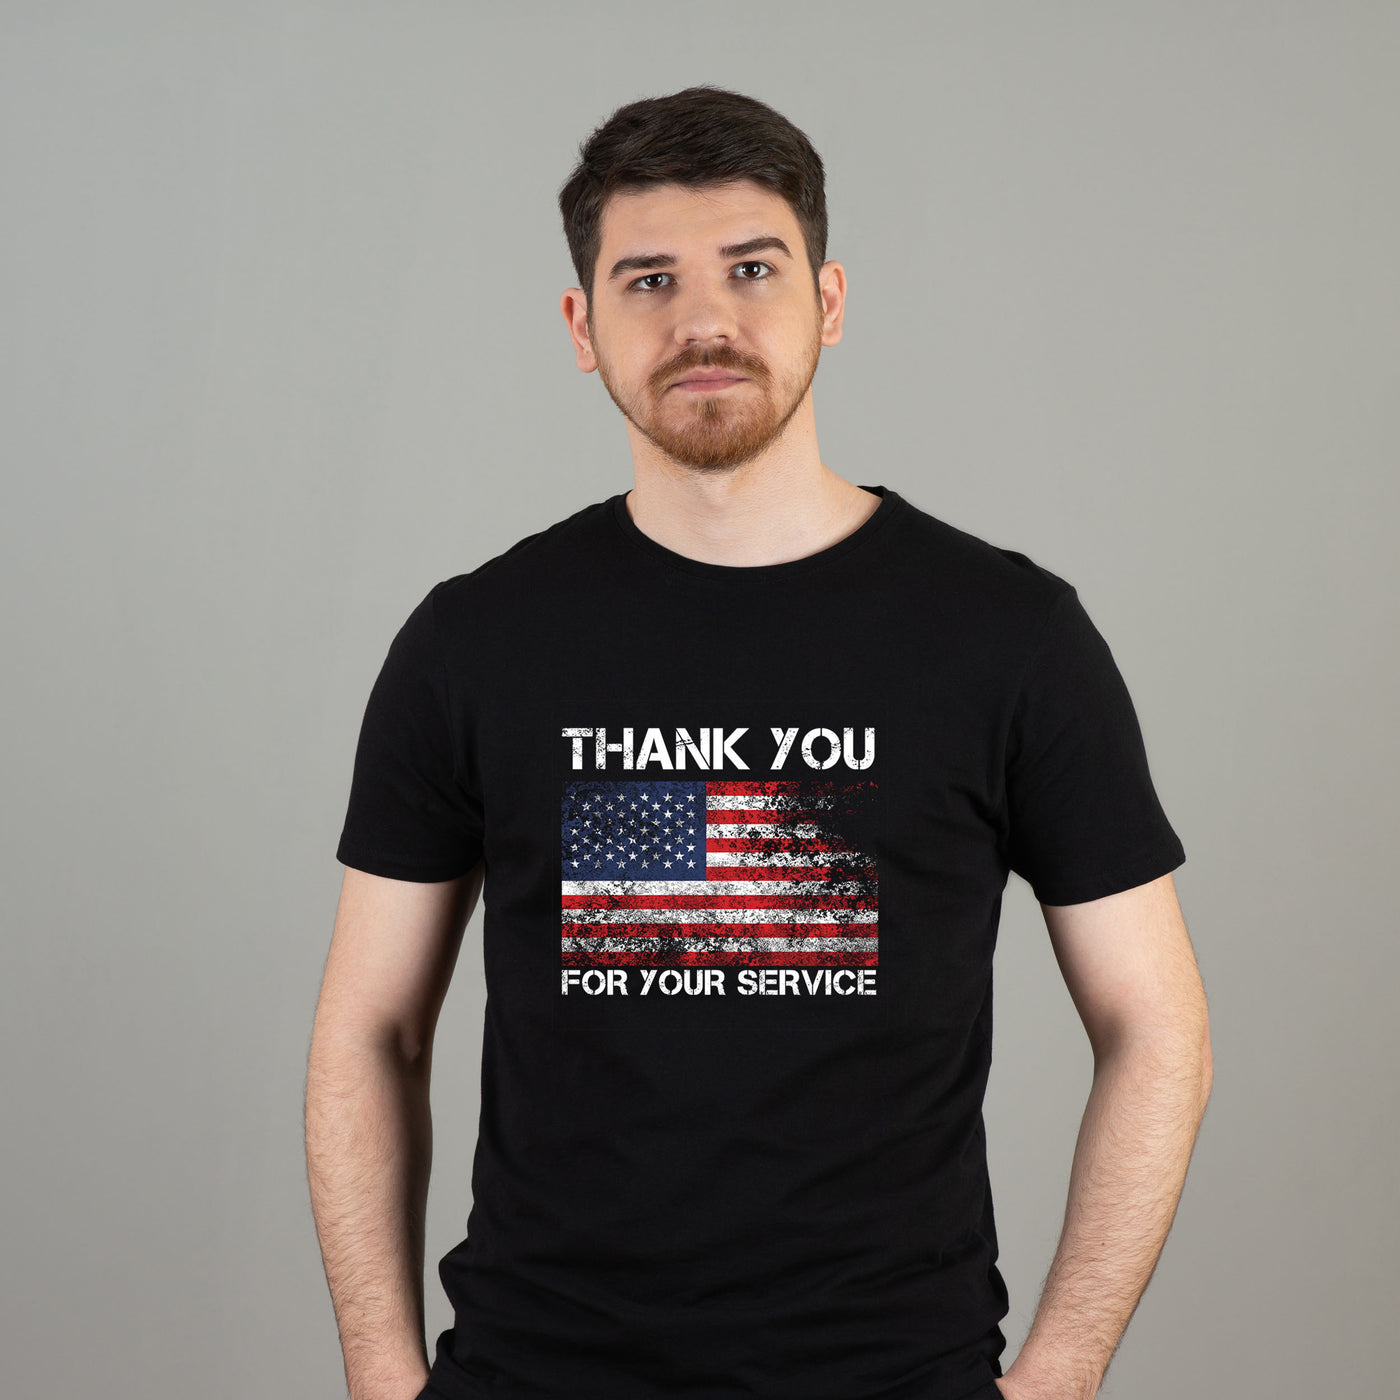 Memorial Day T-Shirt | NYTransfers